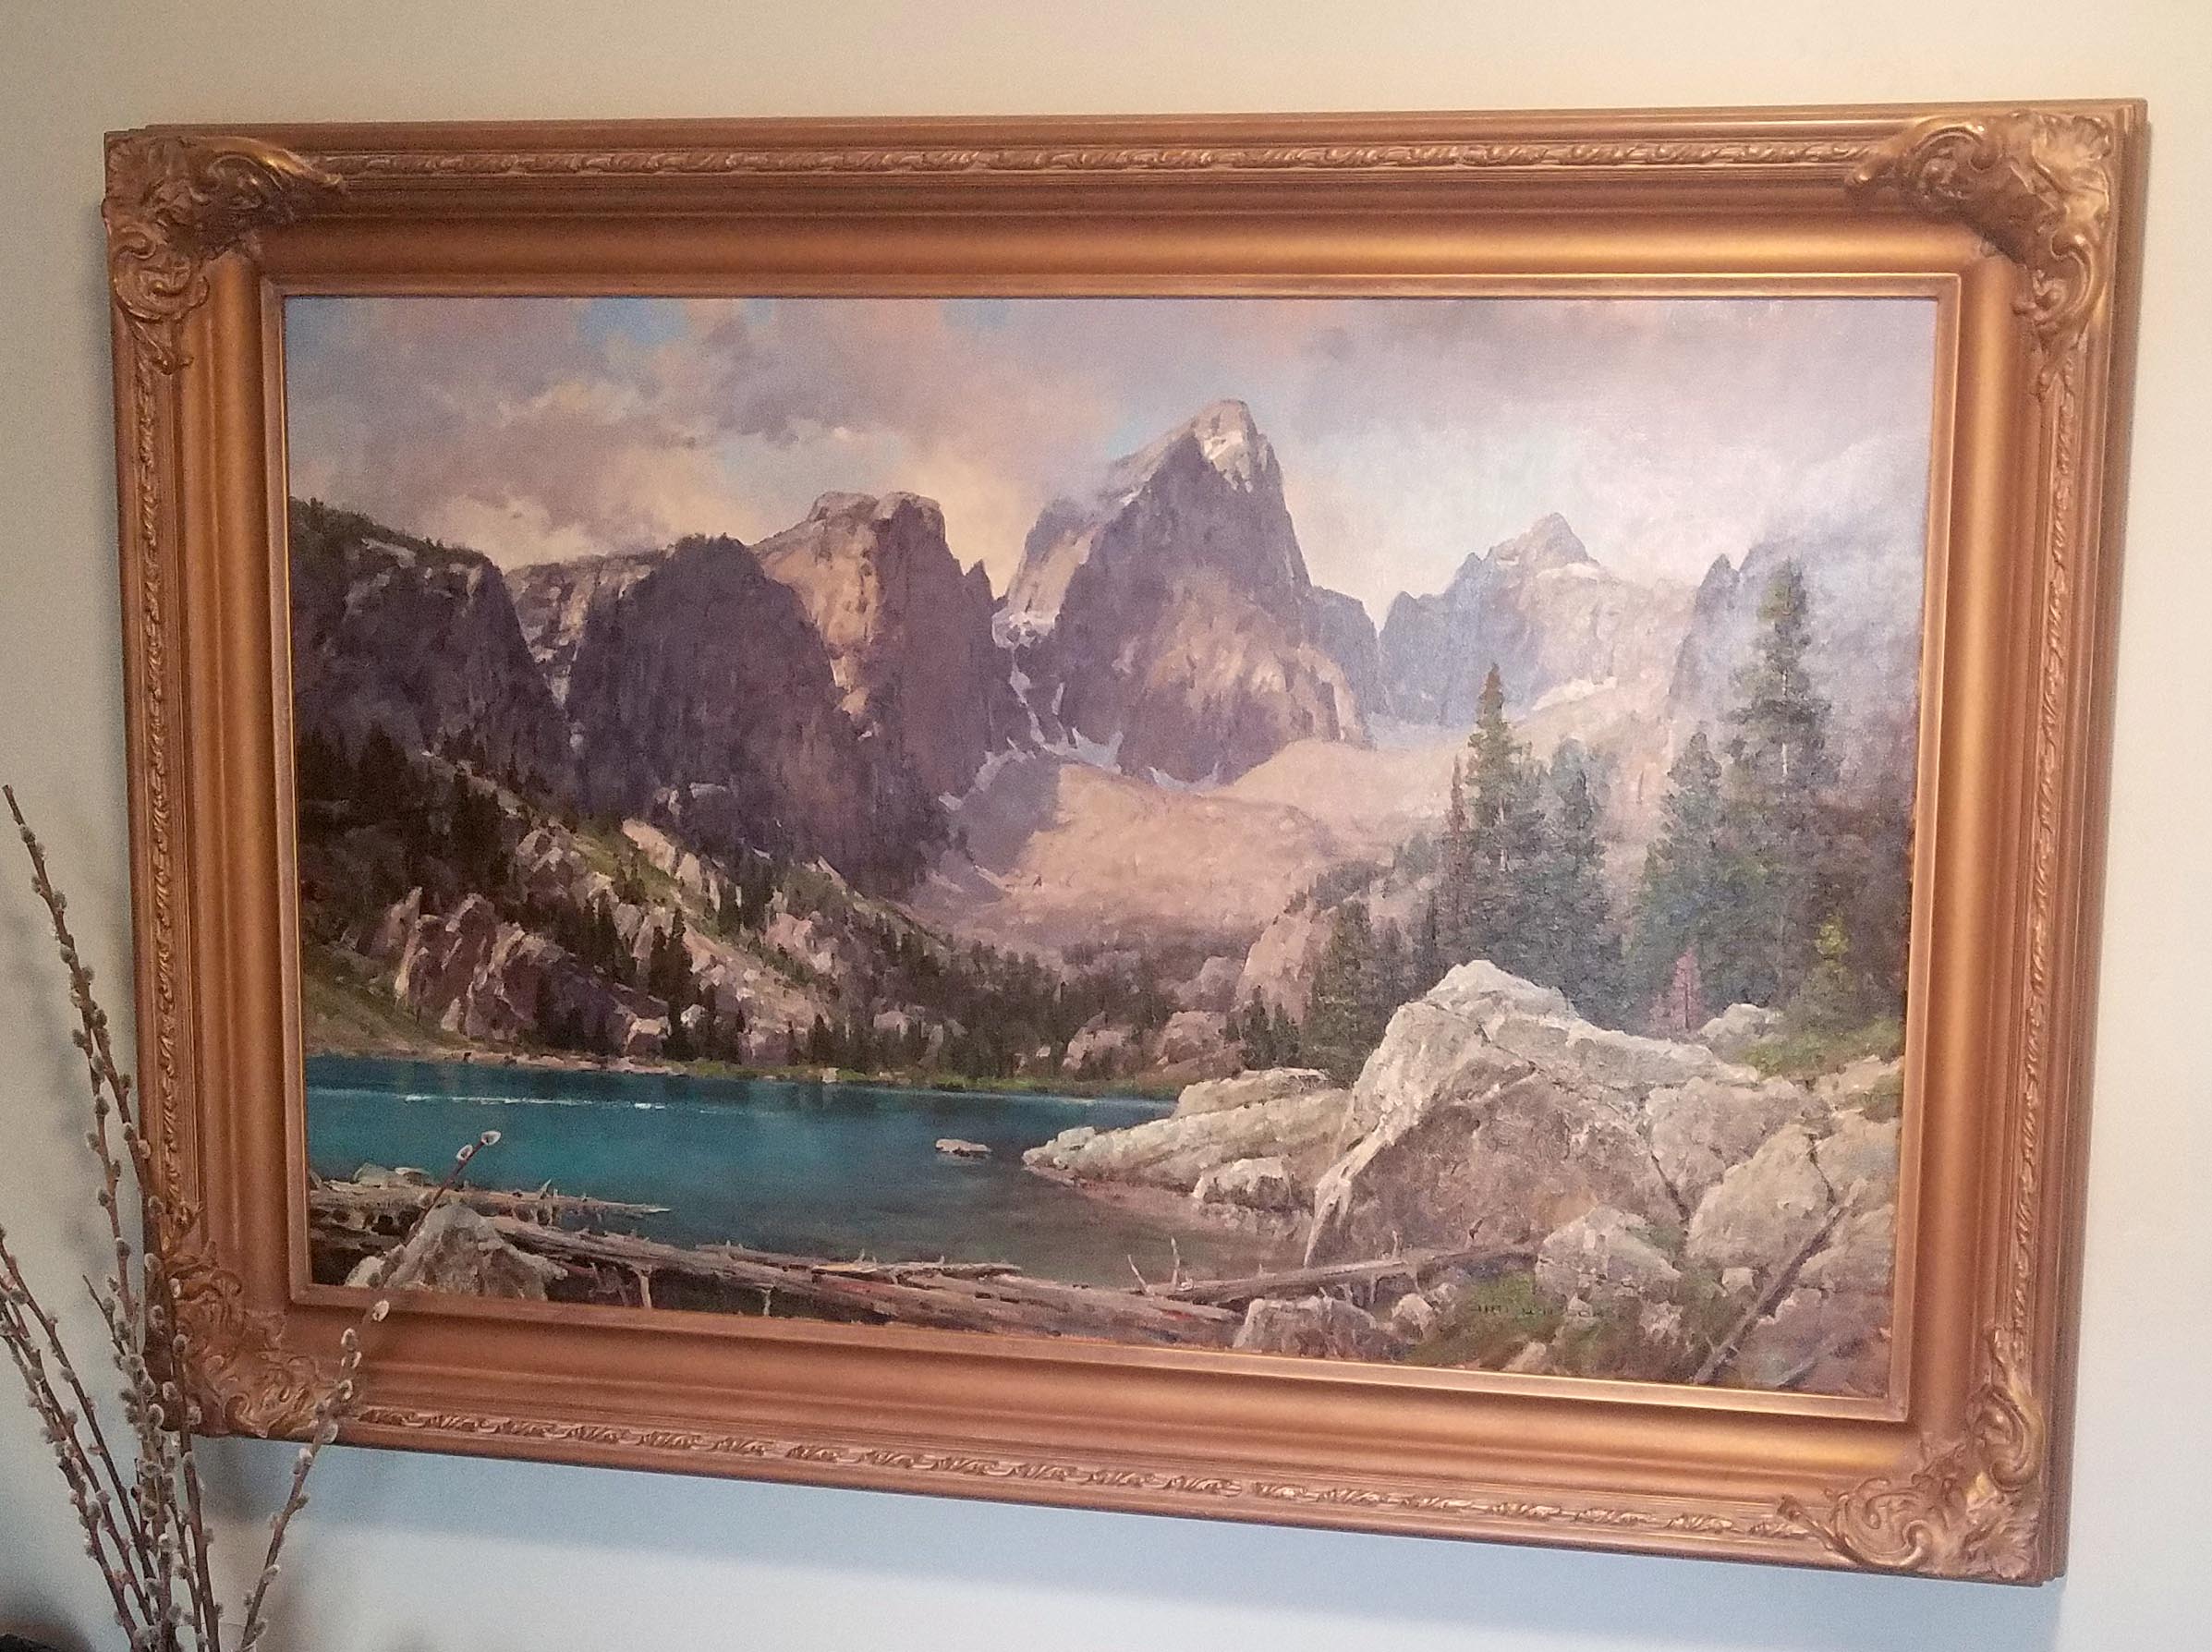 My Jim Wilcox painting will conjure up priceless memories of hiking with my father and wife every time I see it until I die. And I see it every day. That's why you buy landscape art!